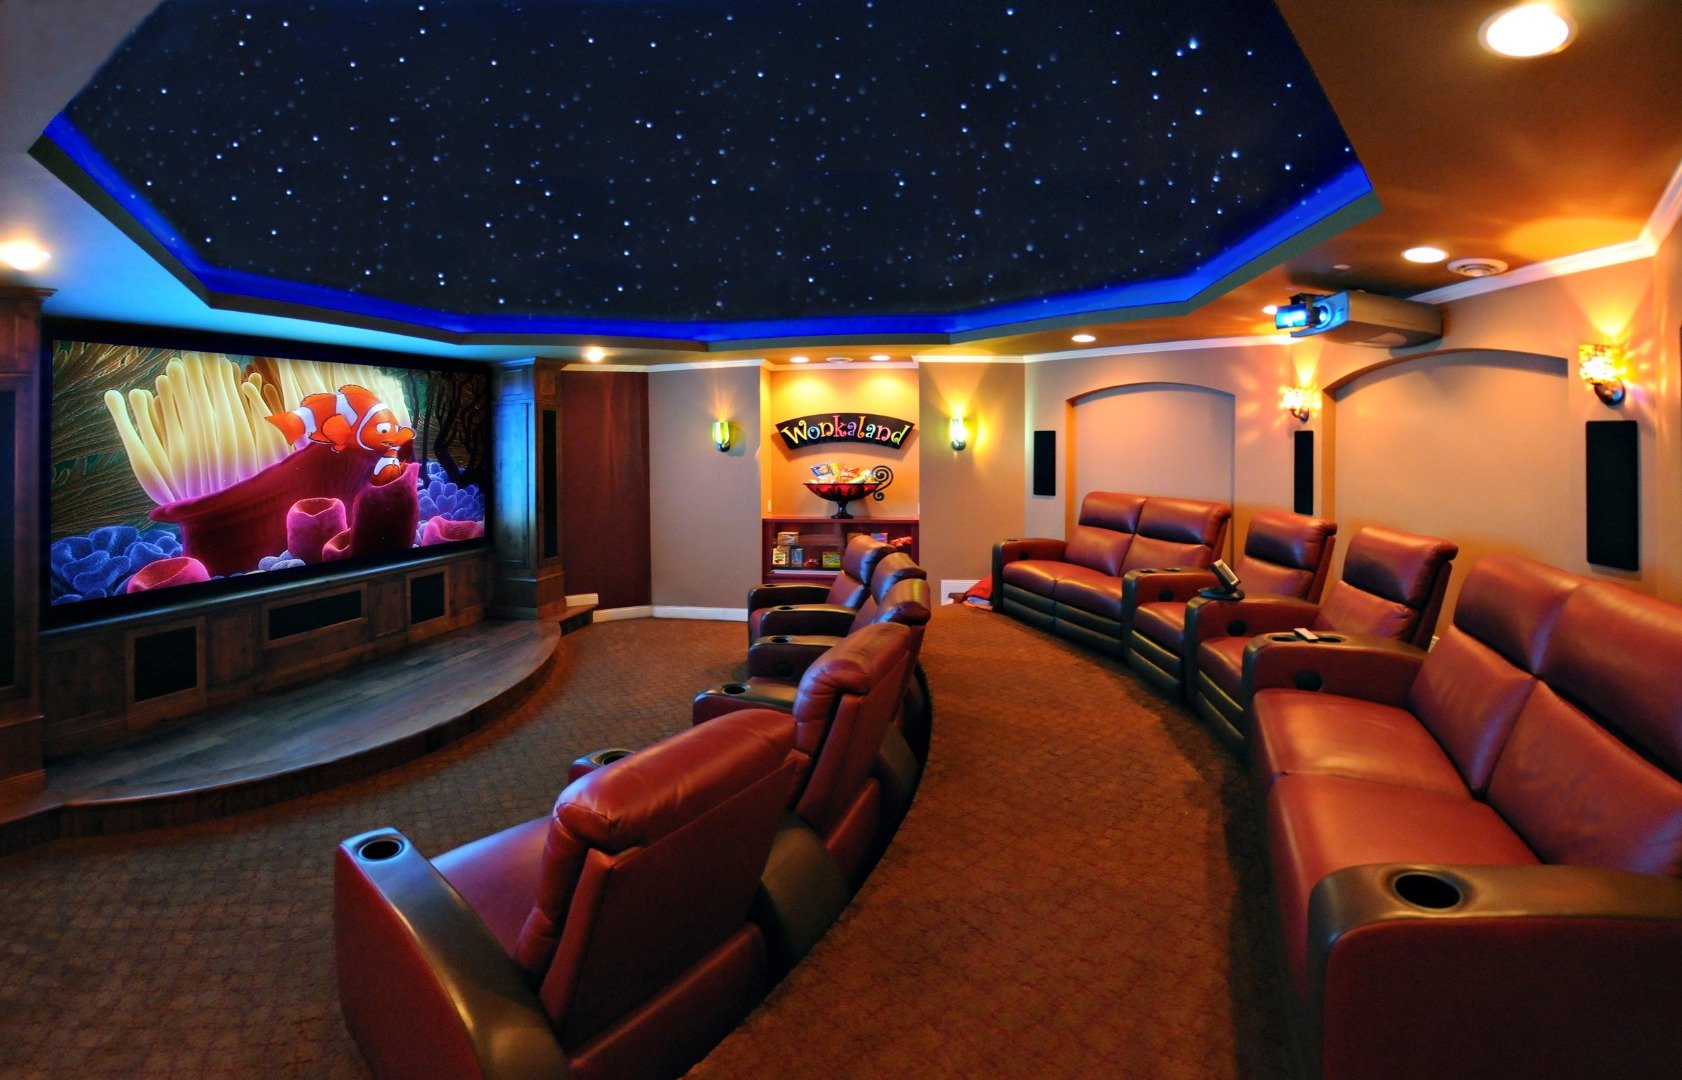 Home Theater Ideas for the Movie Room of Your Dreams!